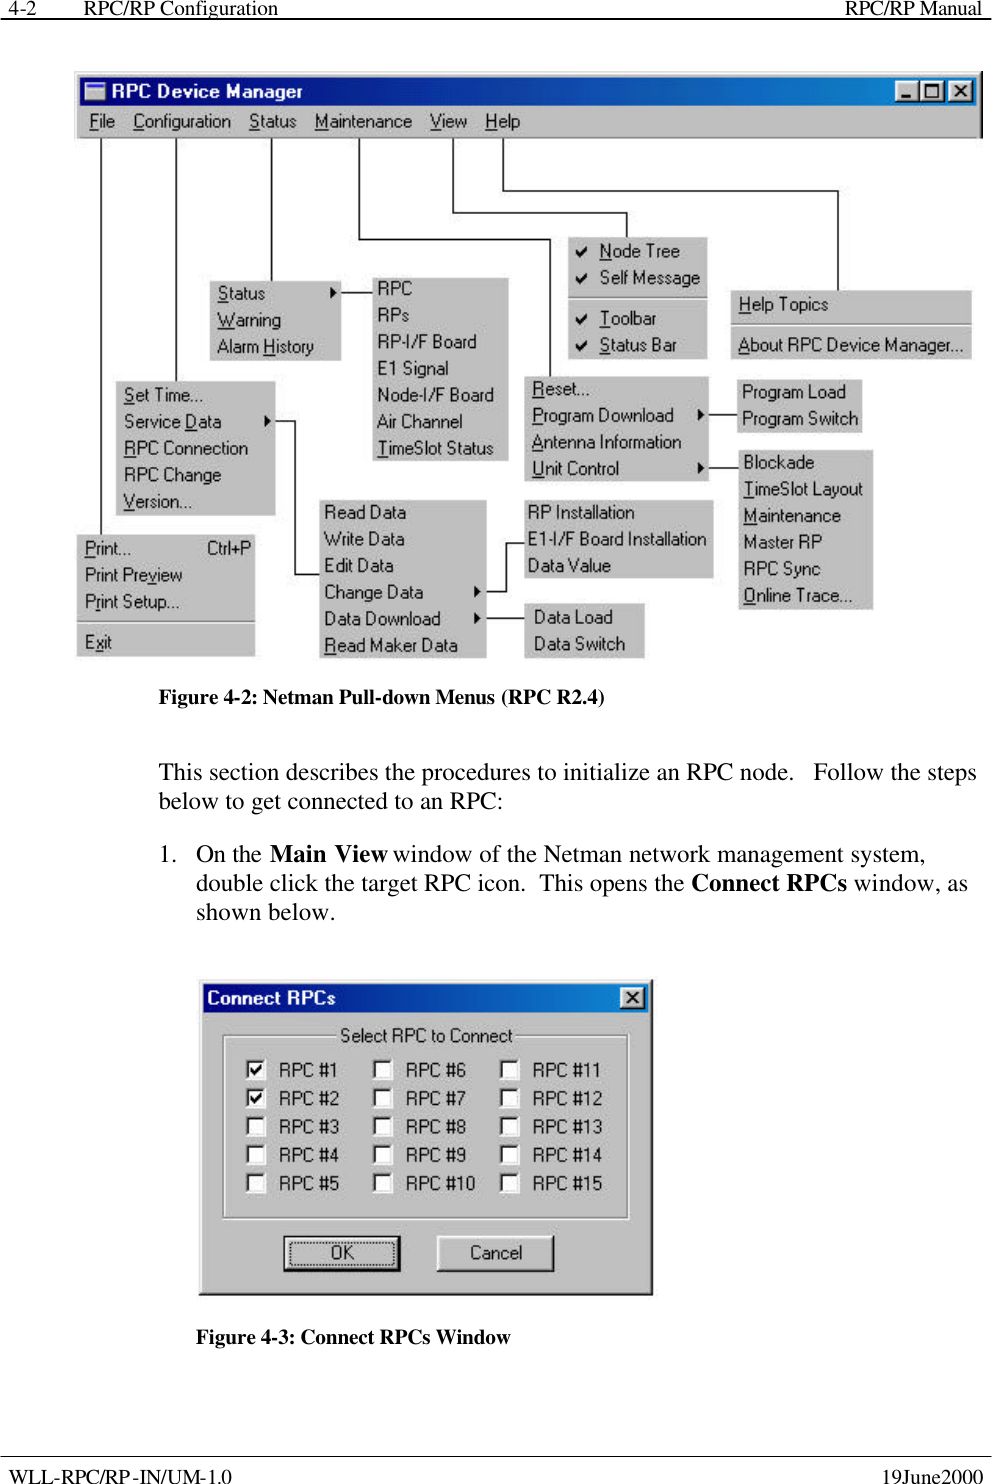  RPC/RP Configuration    RPC/RP Manual   WLL-RPC/RP-IN/UM-1.0    19June2000 4-2 Figure 4-2: Netman Pull-down Menus (RPC R2.4) This section describes the procedures to initialize an RPC node.   Follow the steps below to get connected to an RPC: 1.  On the Main View window of the Netman network management system, double click the target RPC icon.  This opens the Connect RPCs window, as shown below.  Figure 4-3: Connect RPCs Window 